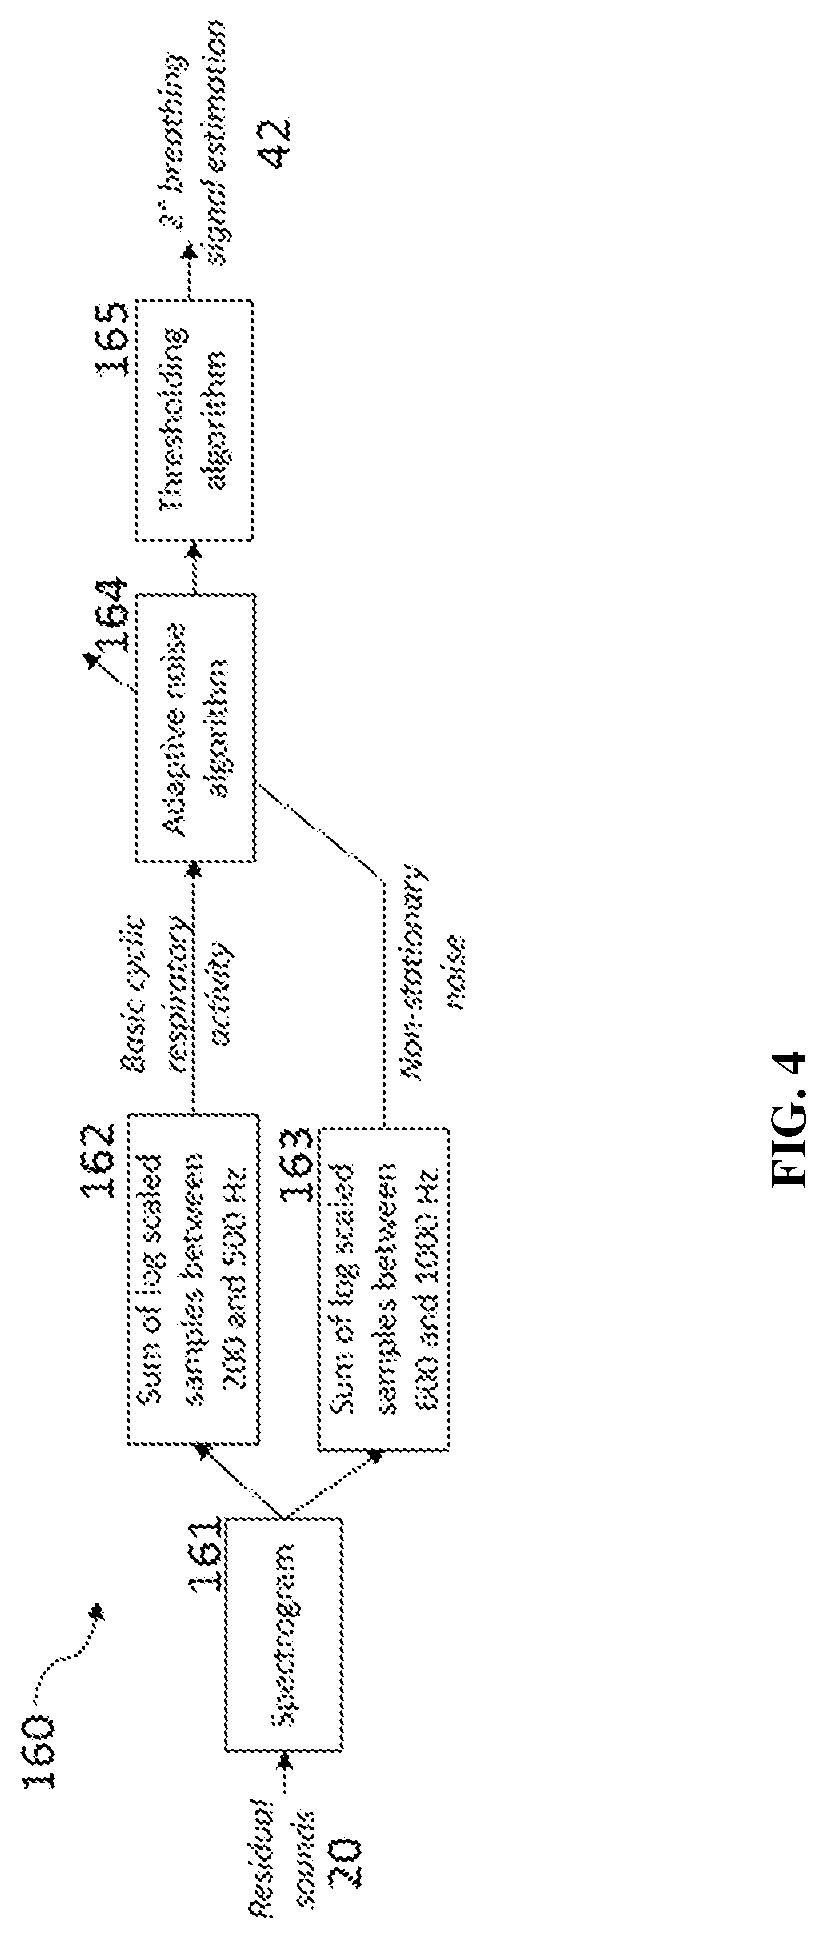 Method and system for monitoring physiological signals